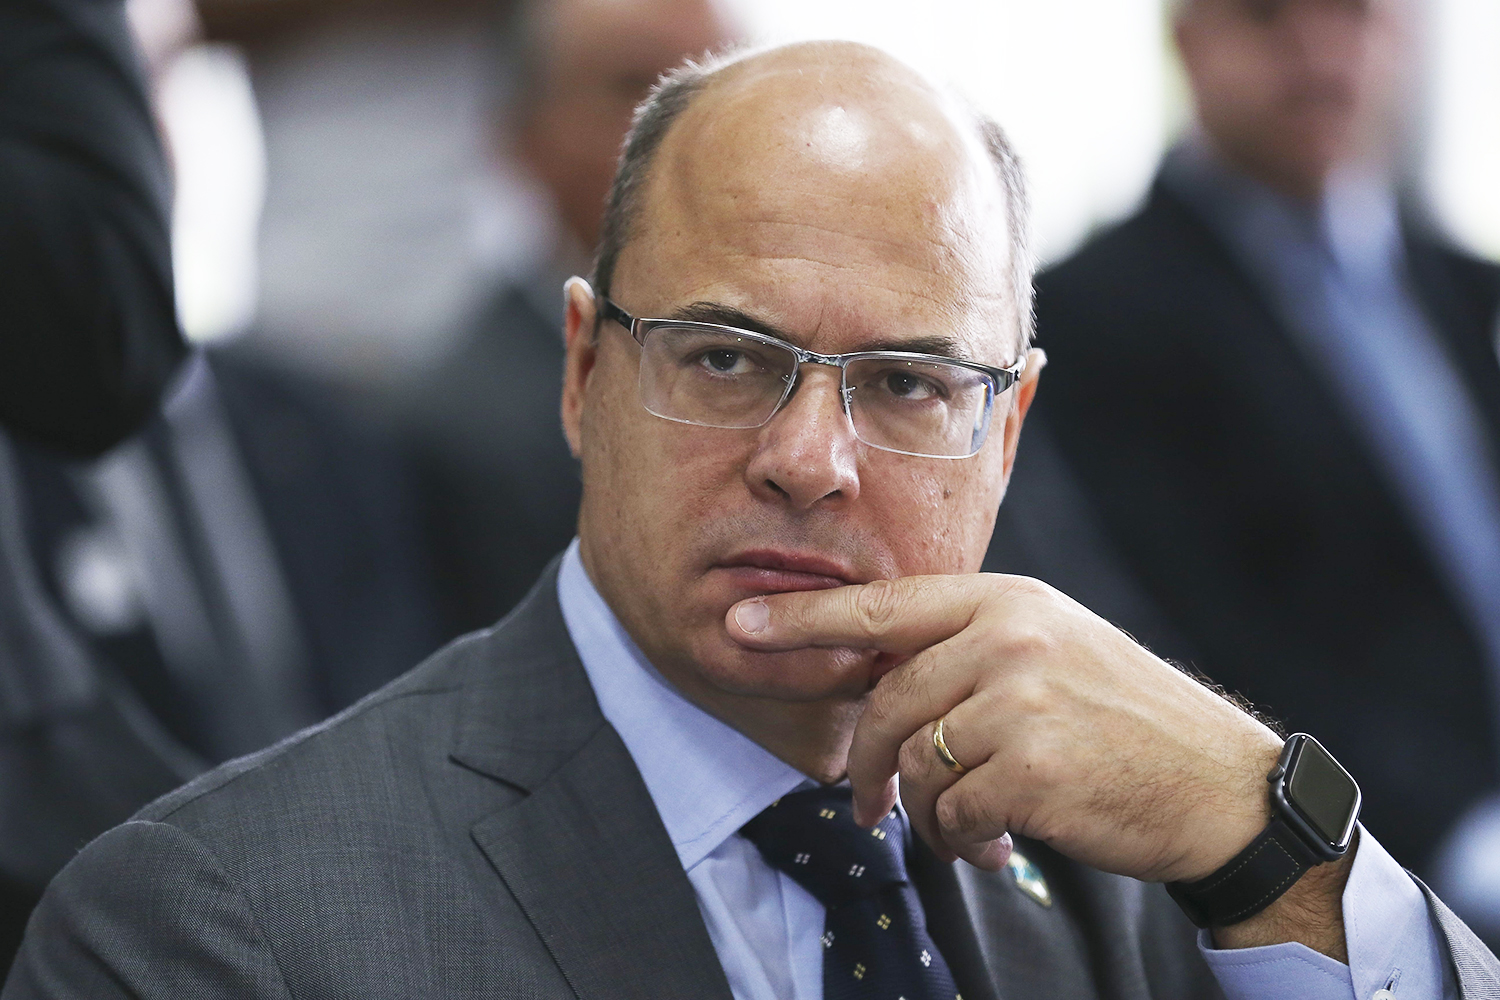 Rio's Governor, Wilson Witzel, said that "with UN authorization, in other parts of the world, we would be allowed to deploy a missile and blow these people up."